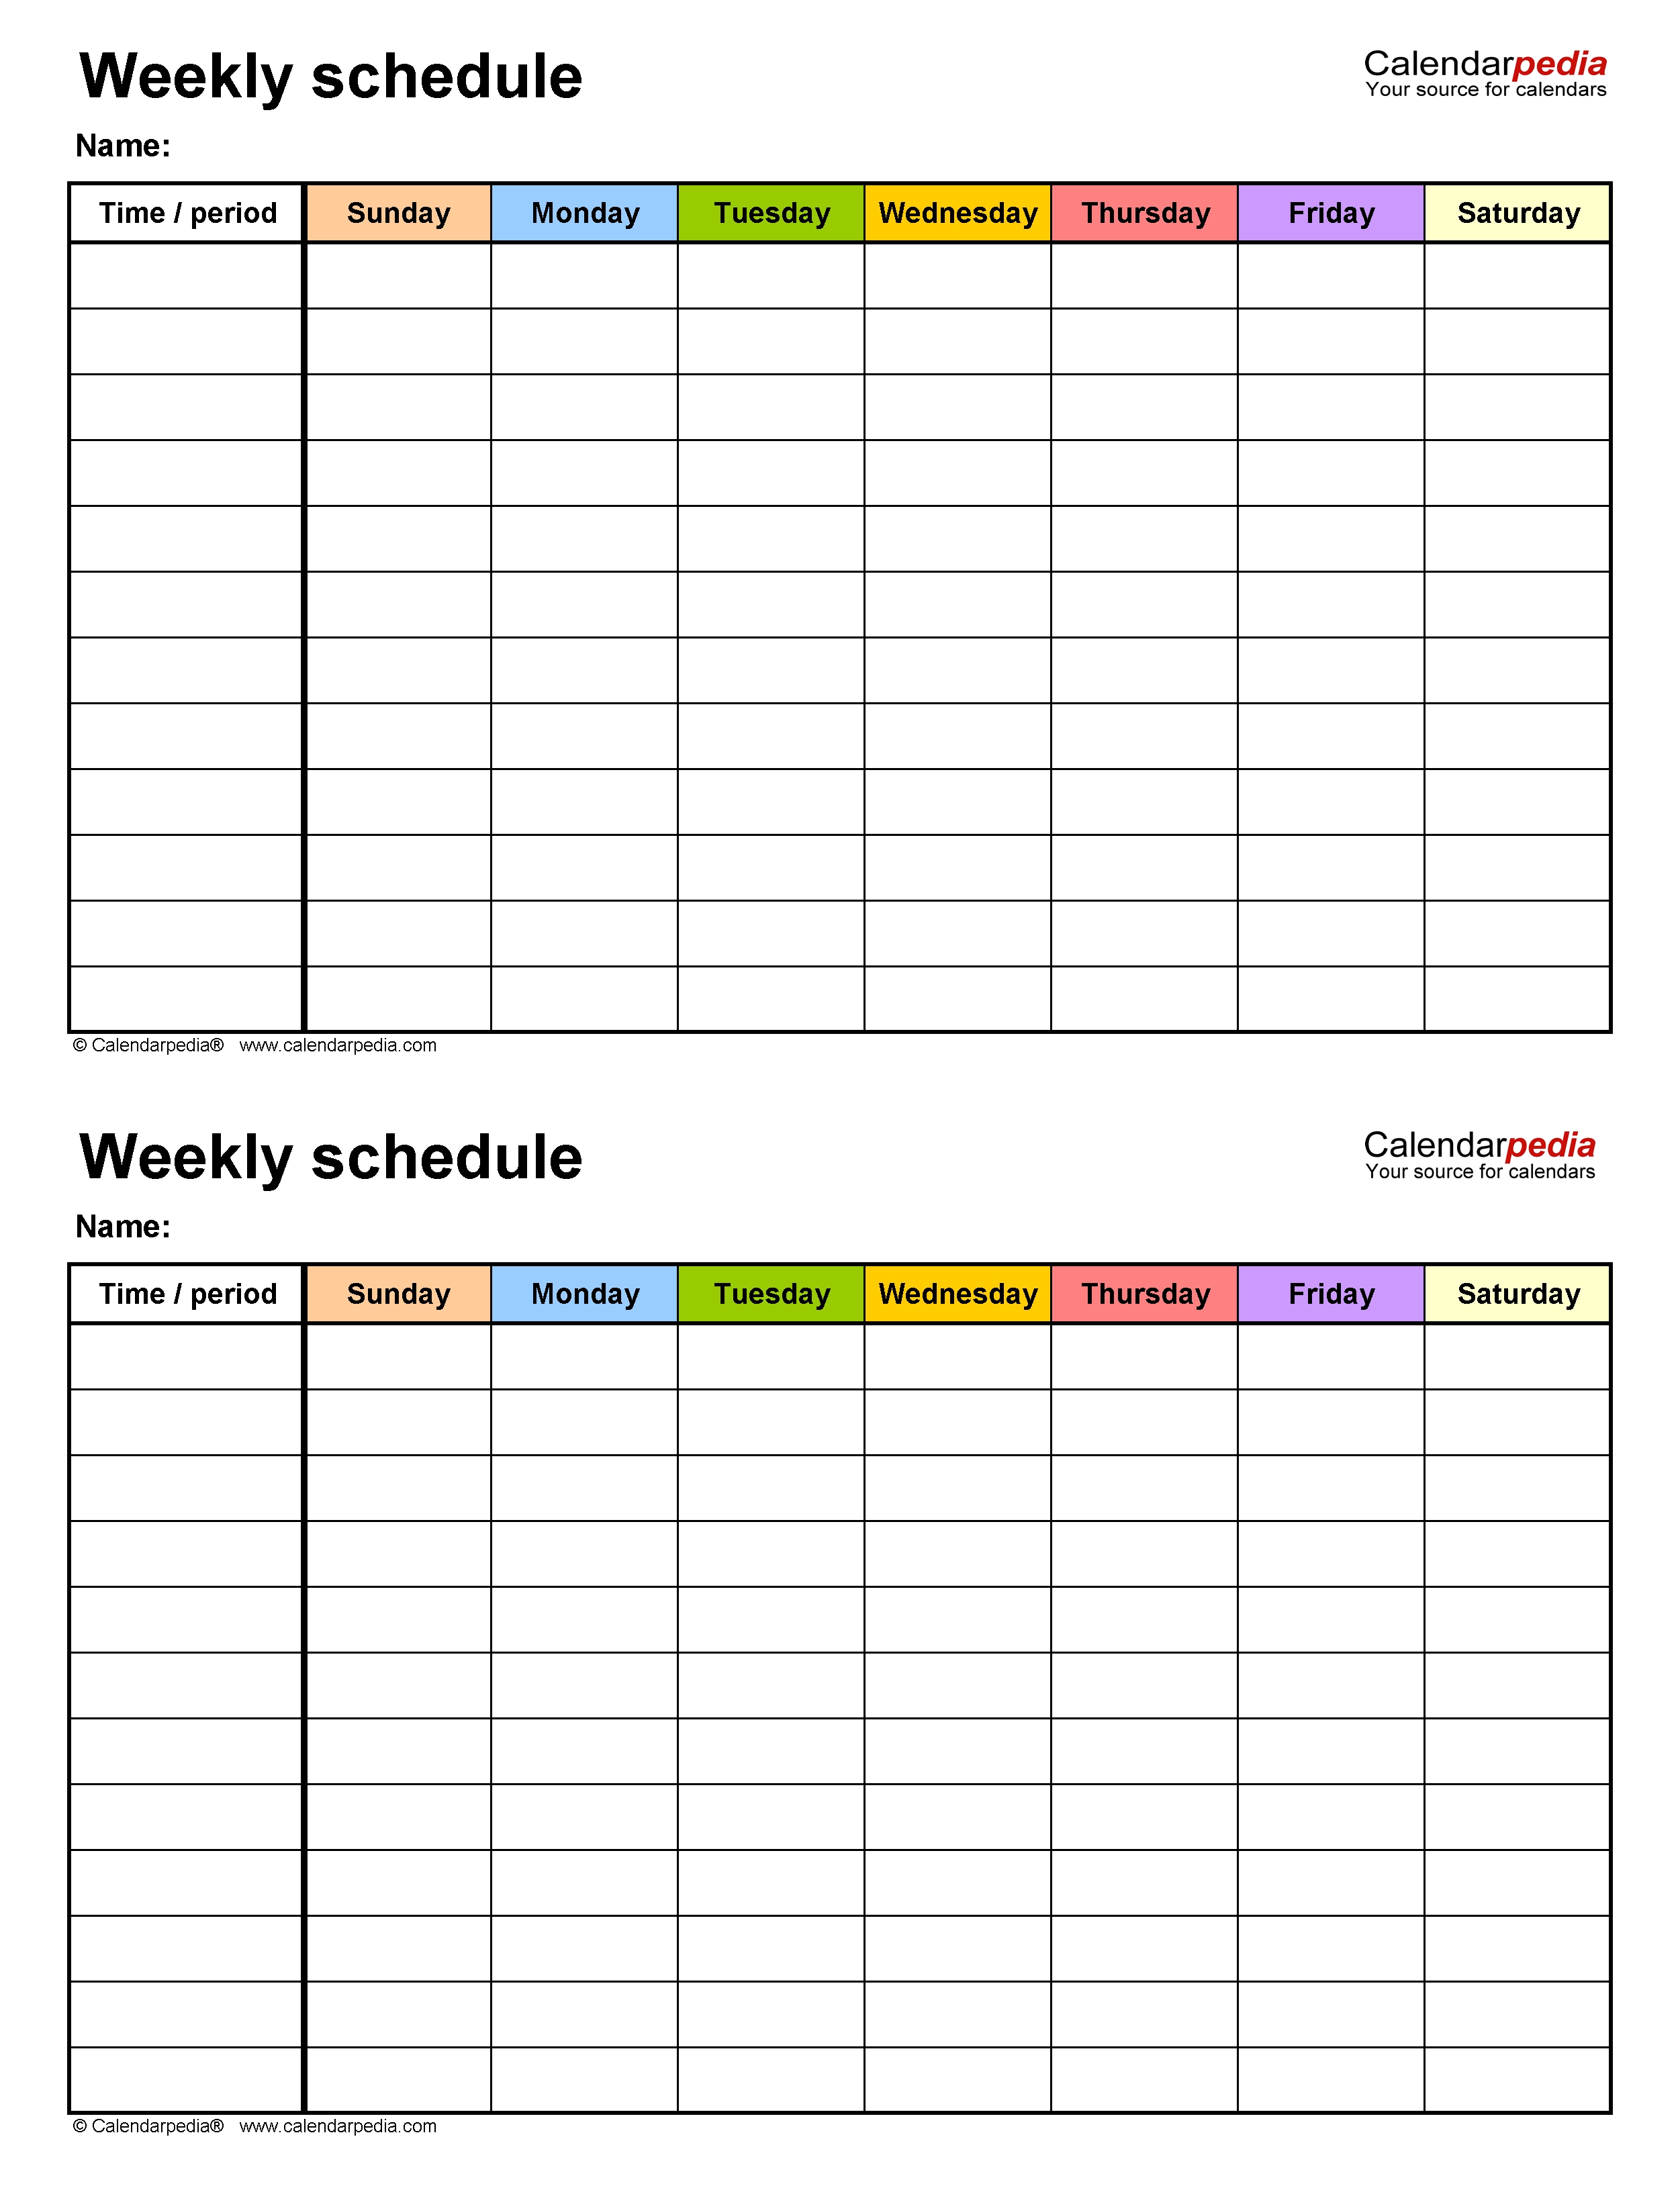 Free Weekly Schedule Templates For Excel - 18 Templates 2 Week Calendar Template Excel